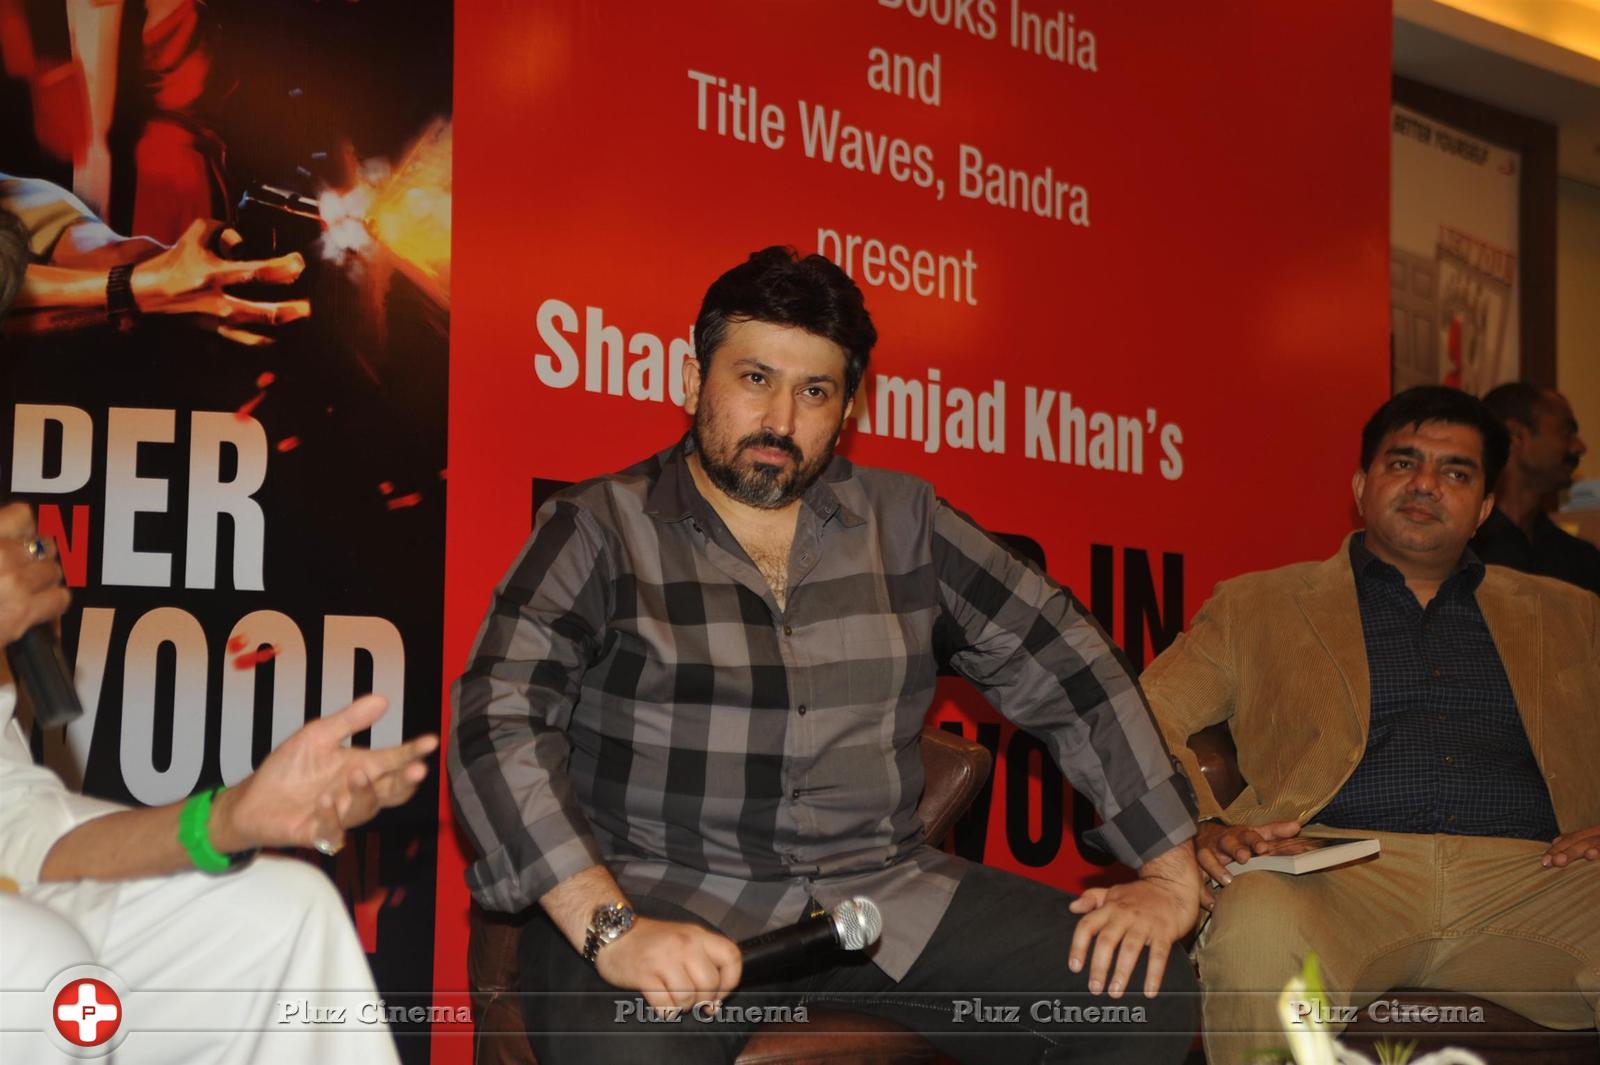 Amitabh Bachchan launches Shadab Amjad Khan's book Murder in Bollywood Photos | Picture 1062806